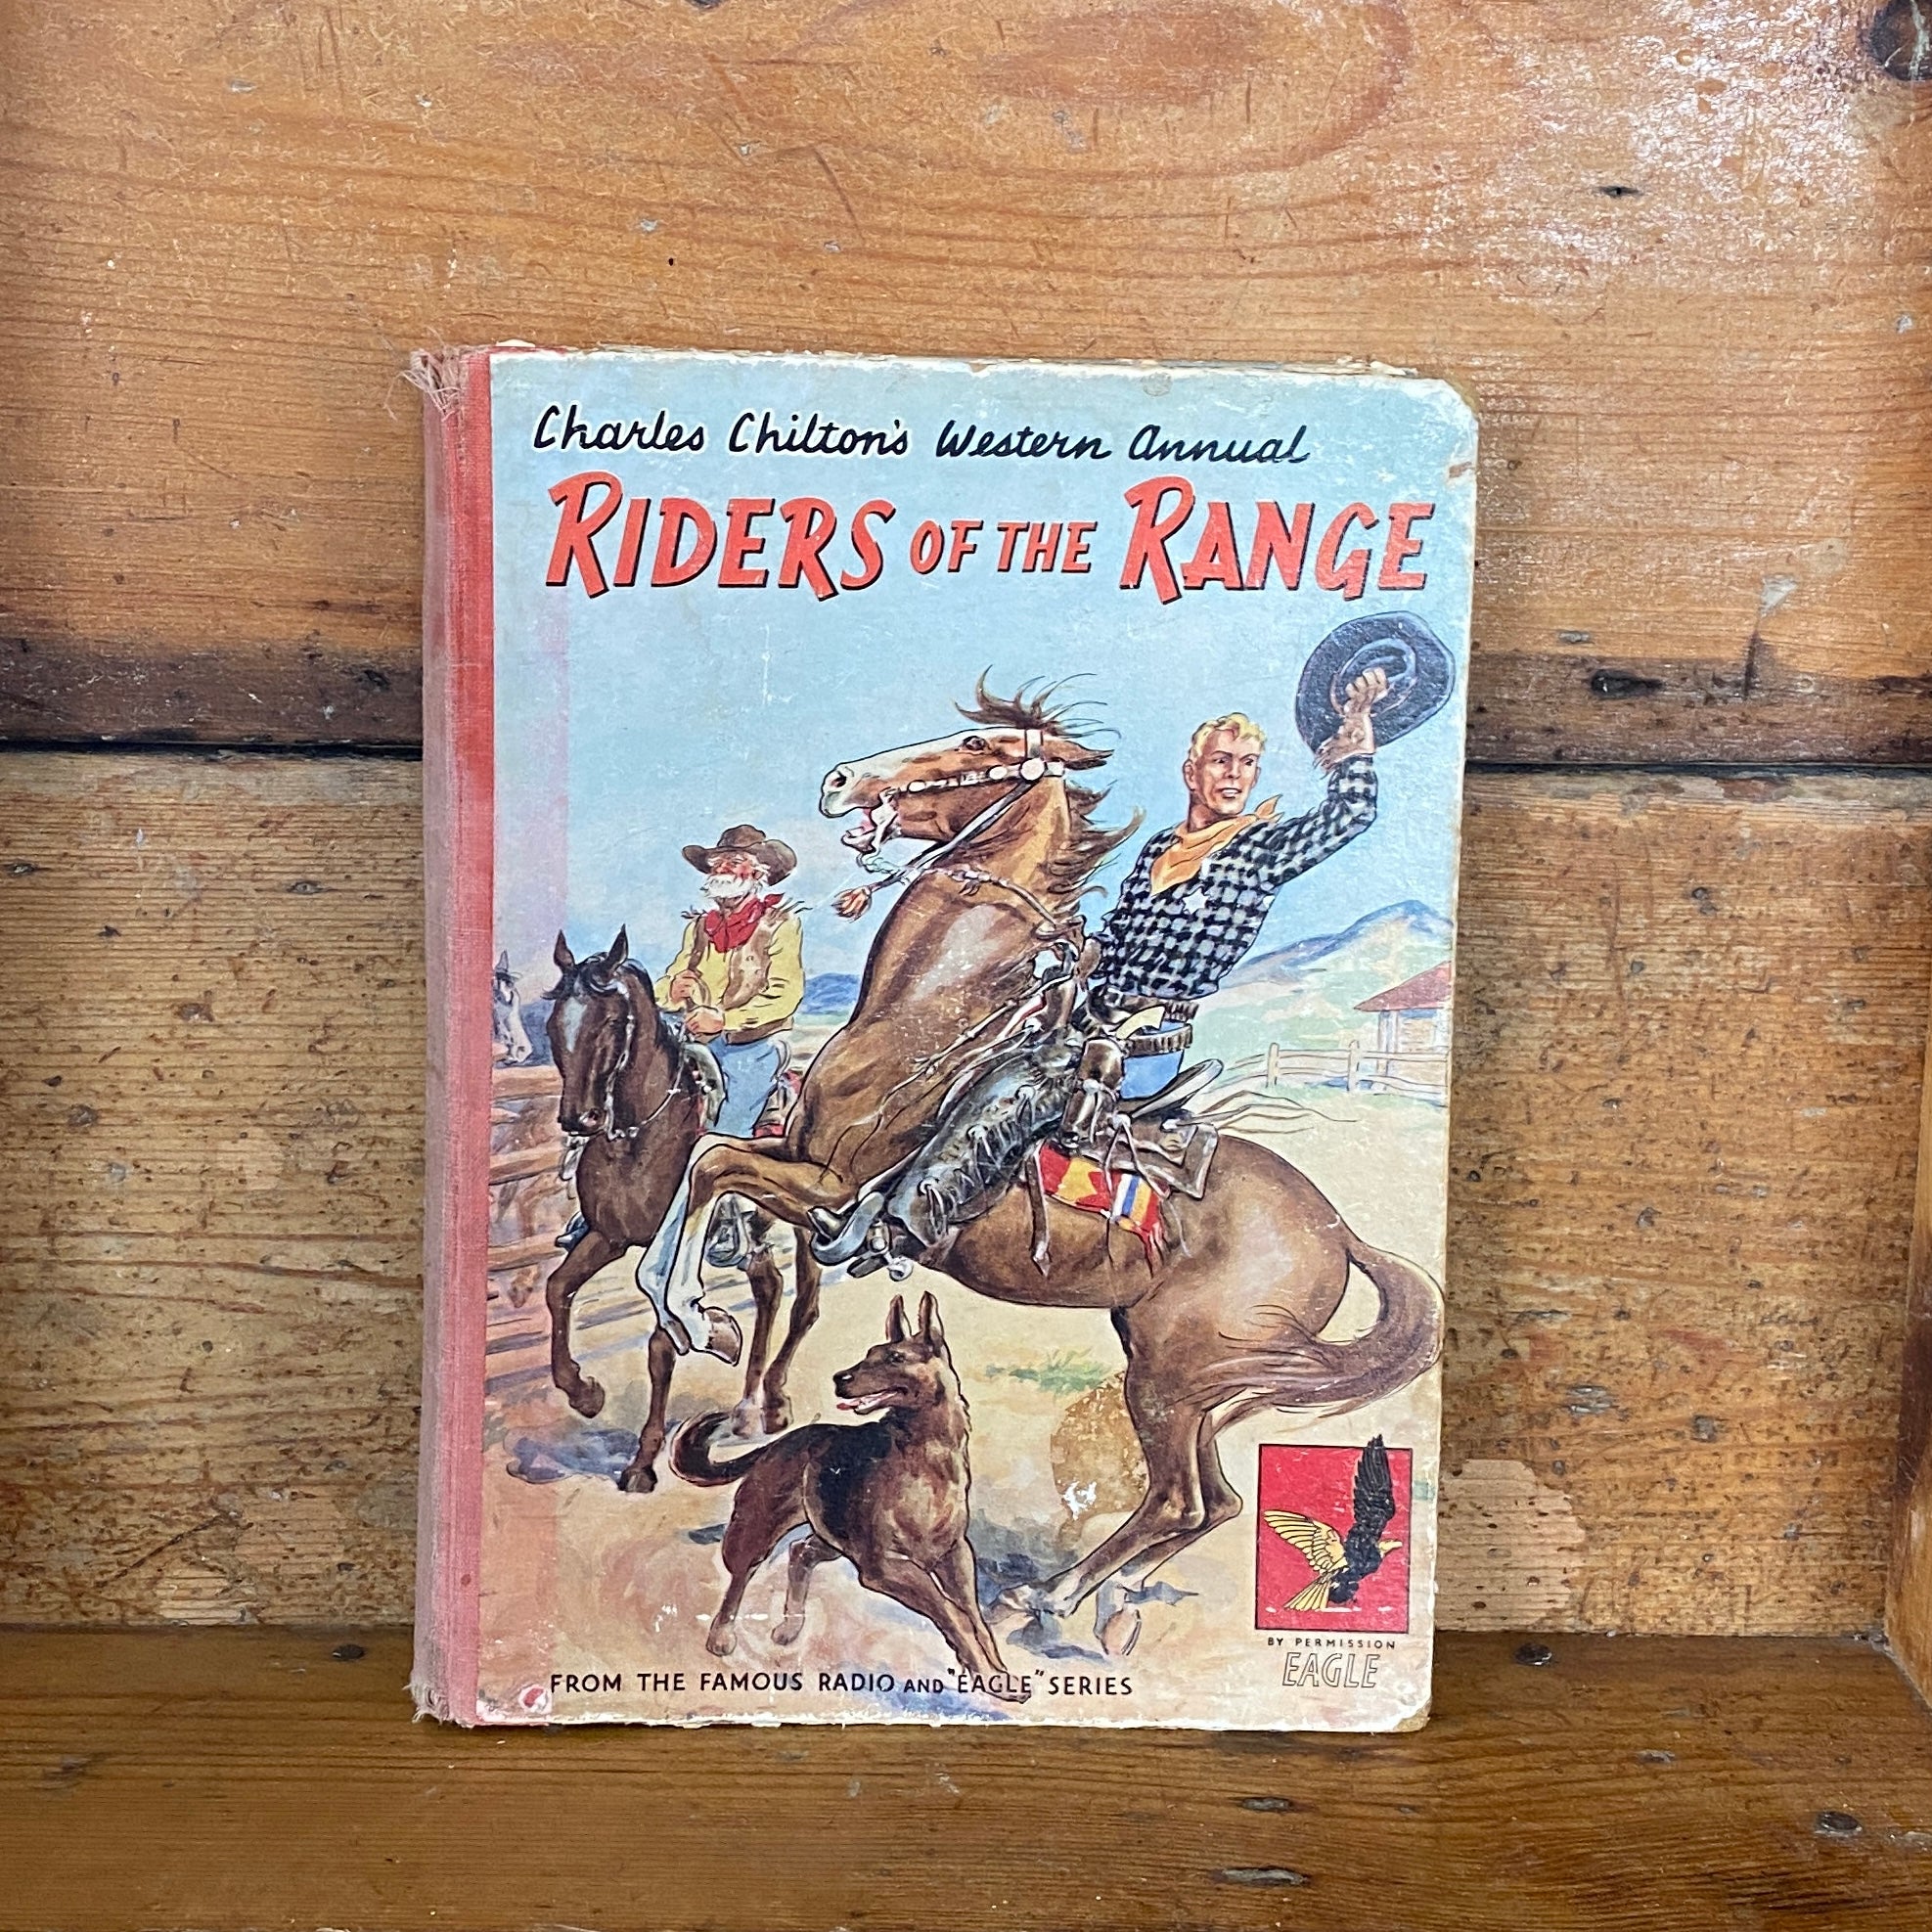 Vintage Riders of the Range by Charles Chilton